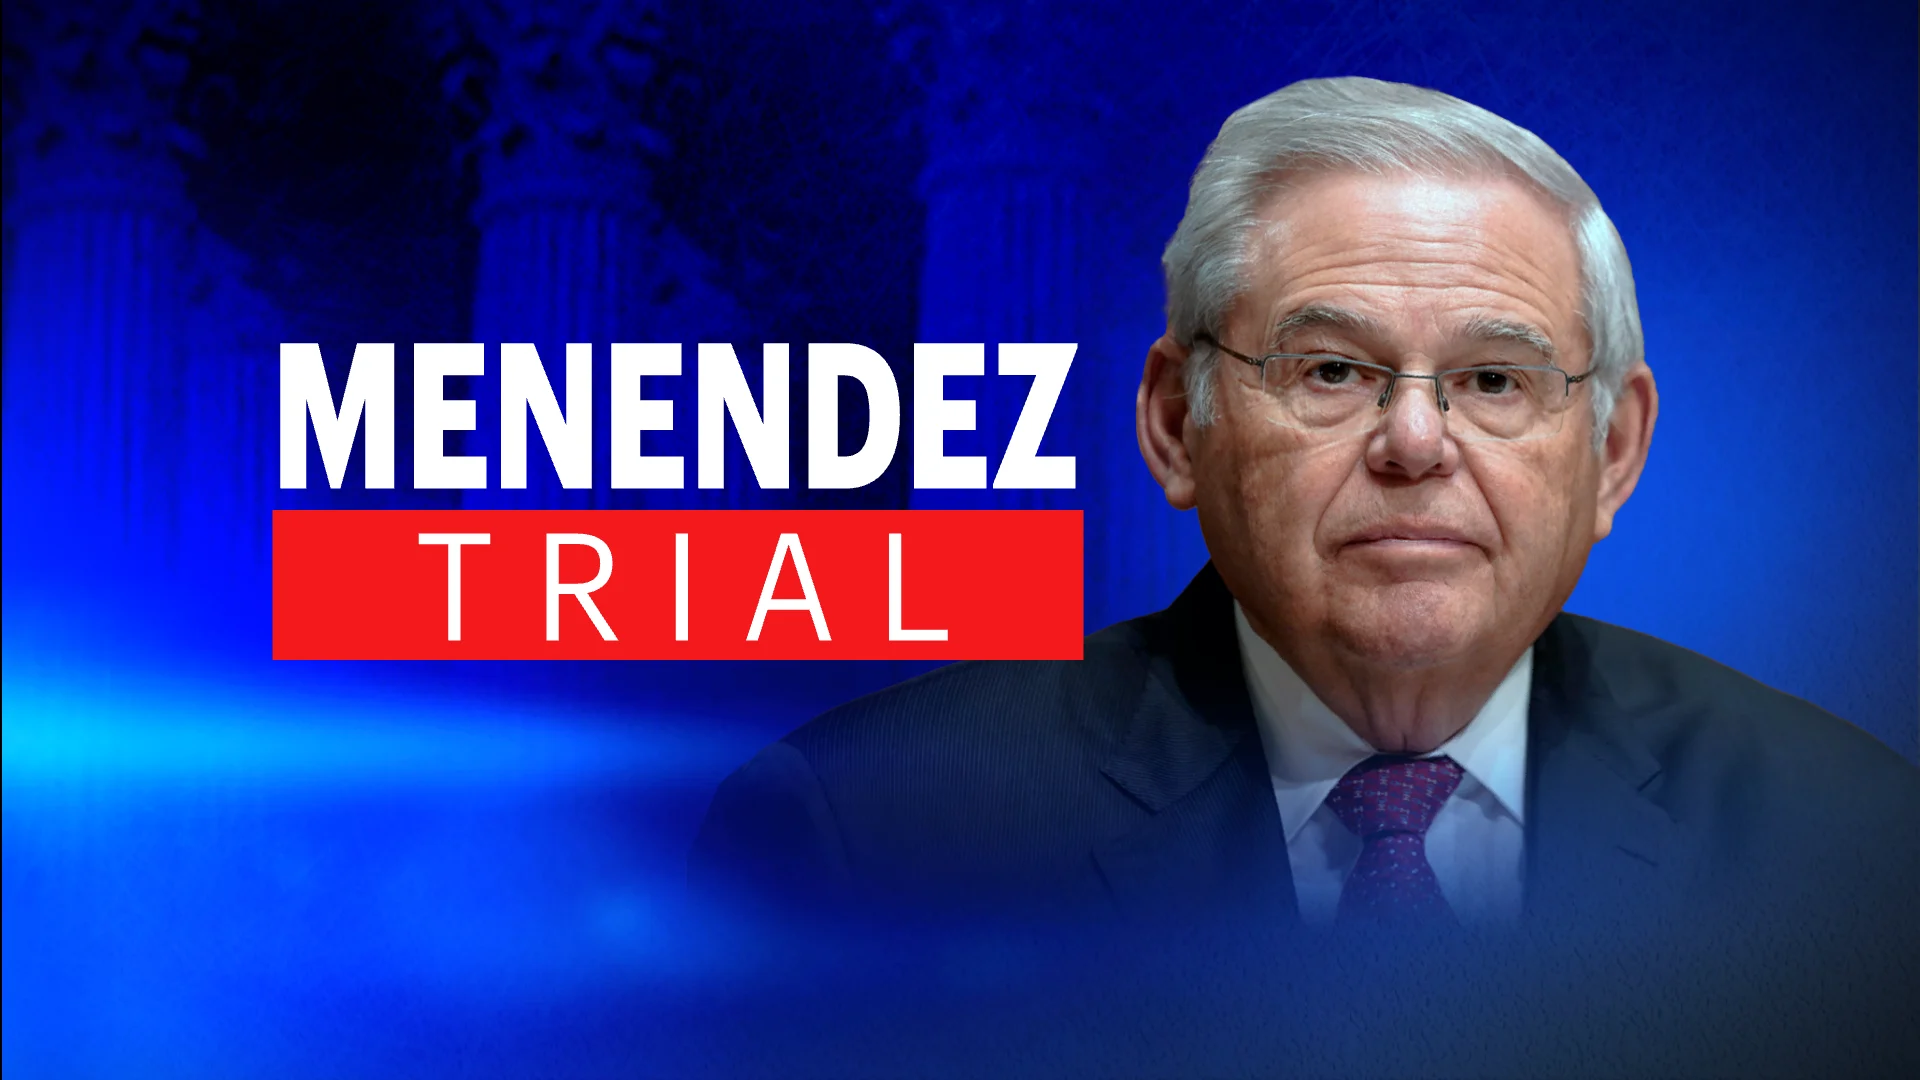 Corruption trial for Sen. Bob Menendez underway with jury selection